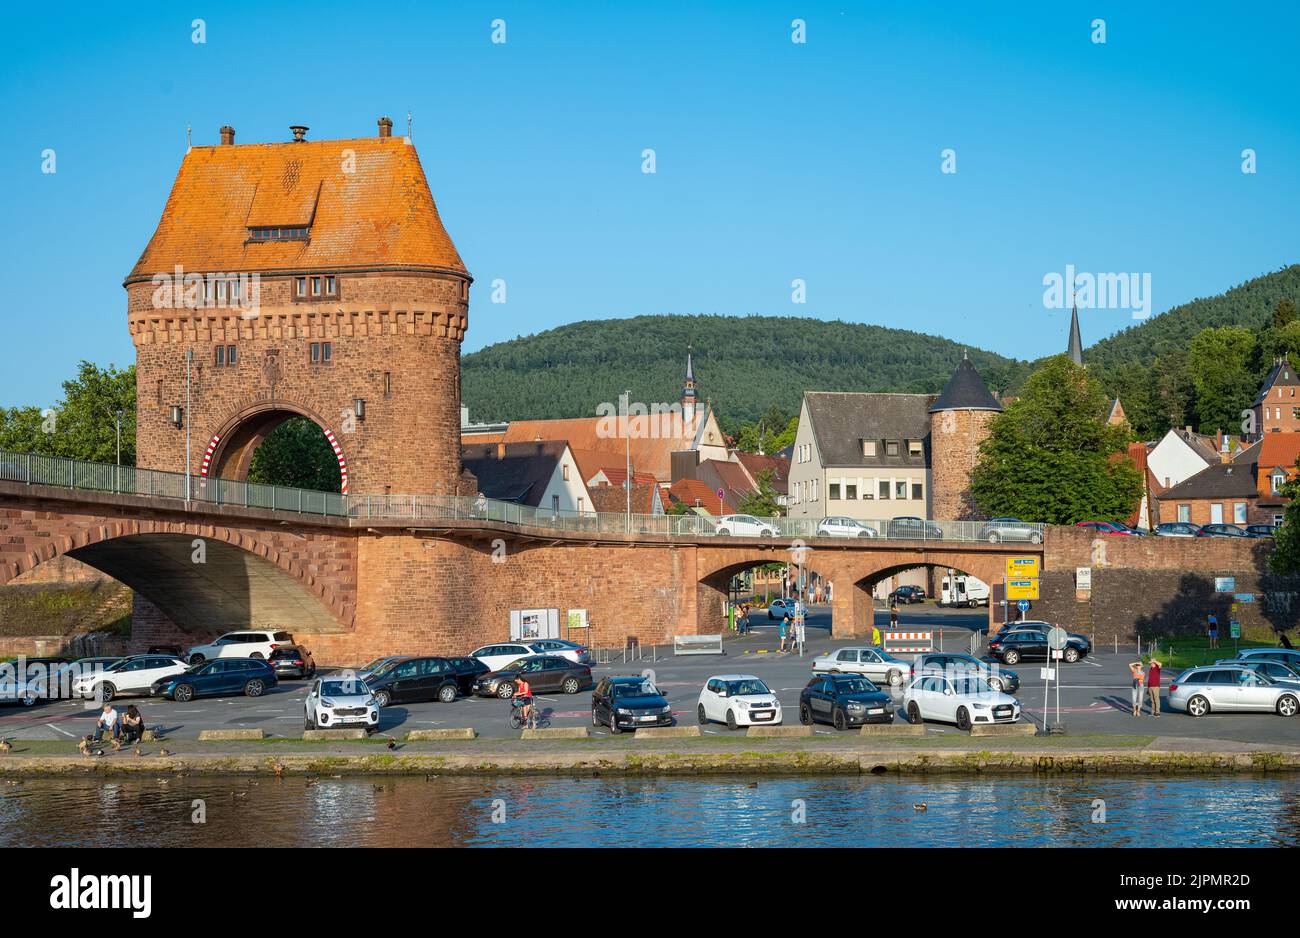 Miltenberg, Germany - July 18, 2021: The old Bridge Gate seen from the River Main Stock Photo